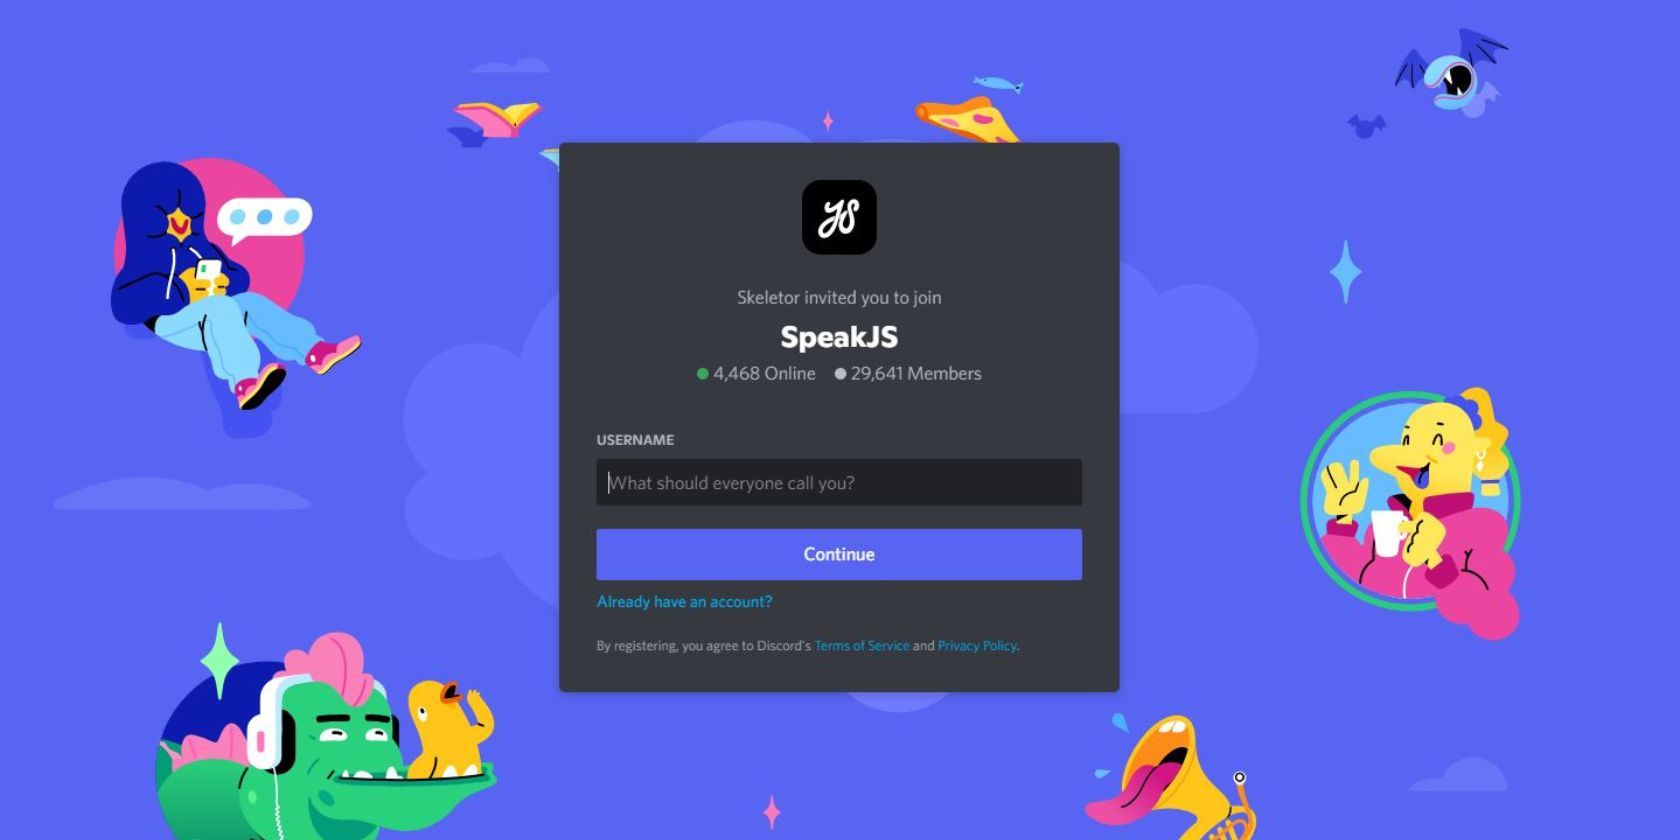 A screenshot of SpeakJS' invite page